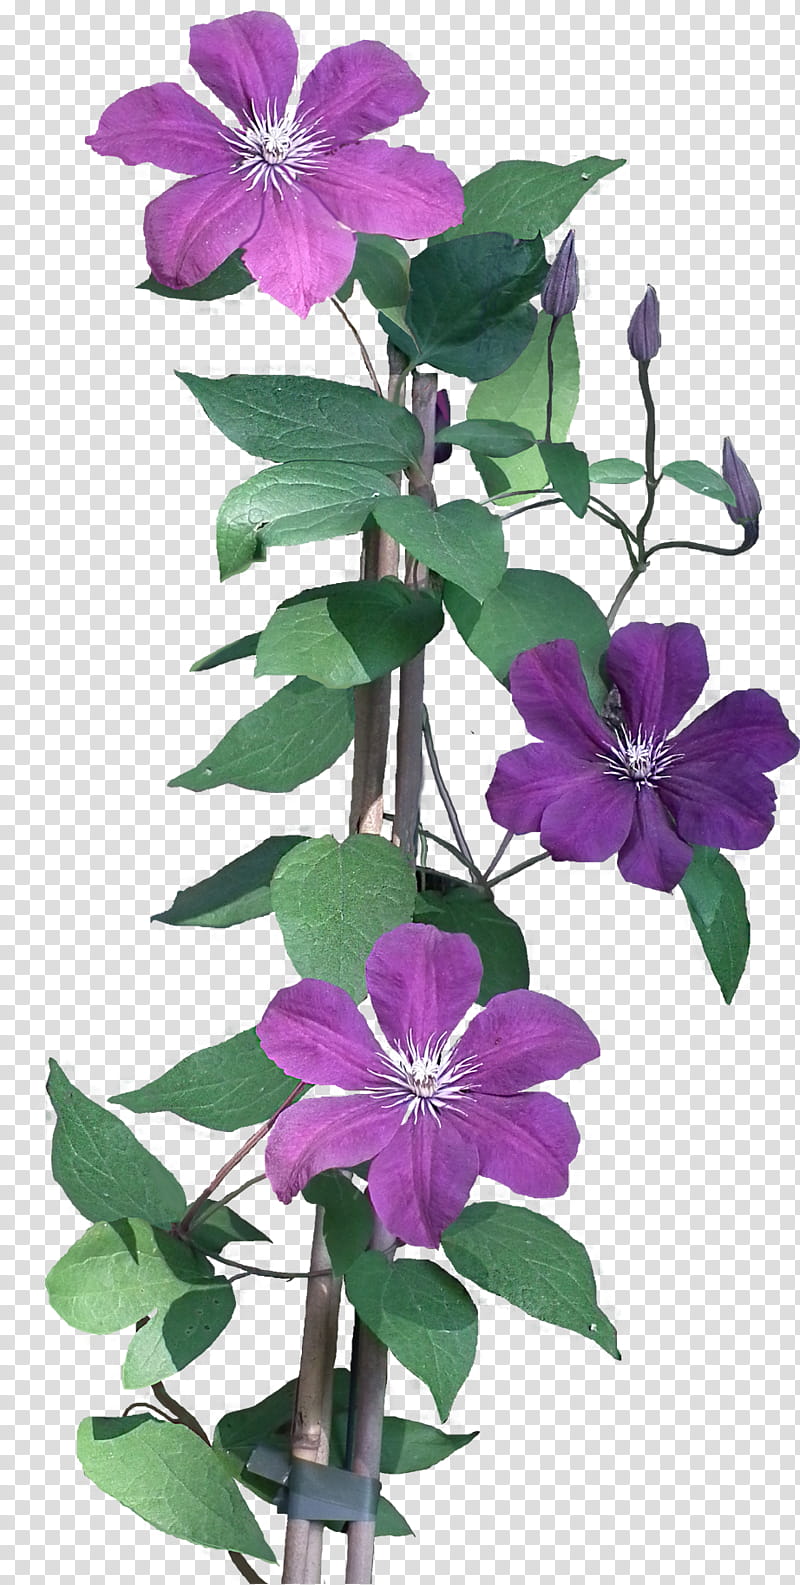 Flowers, purple petaled flowers in bloom transparent background PNG clipart